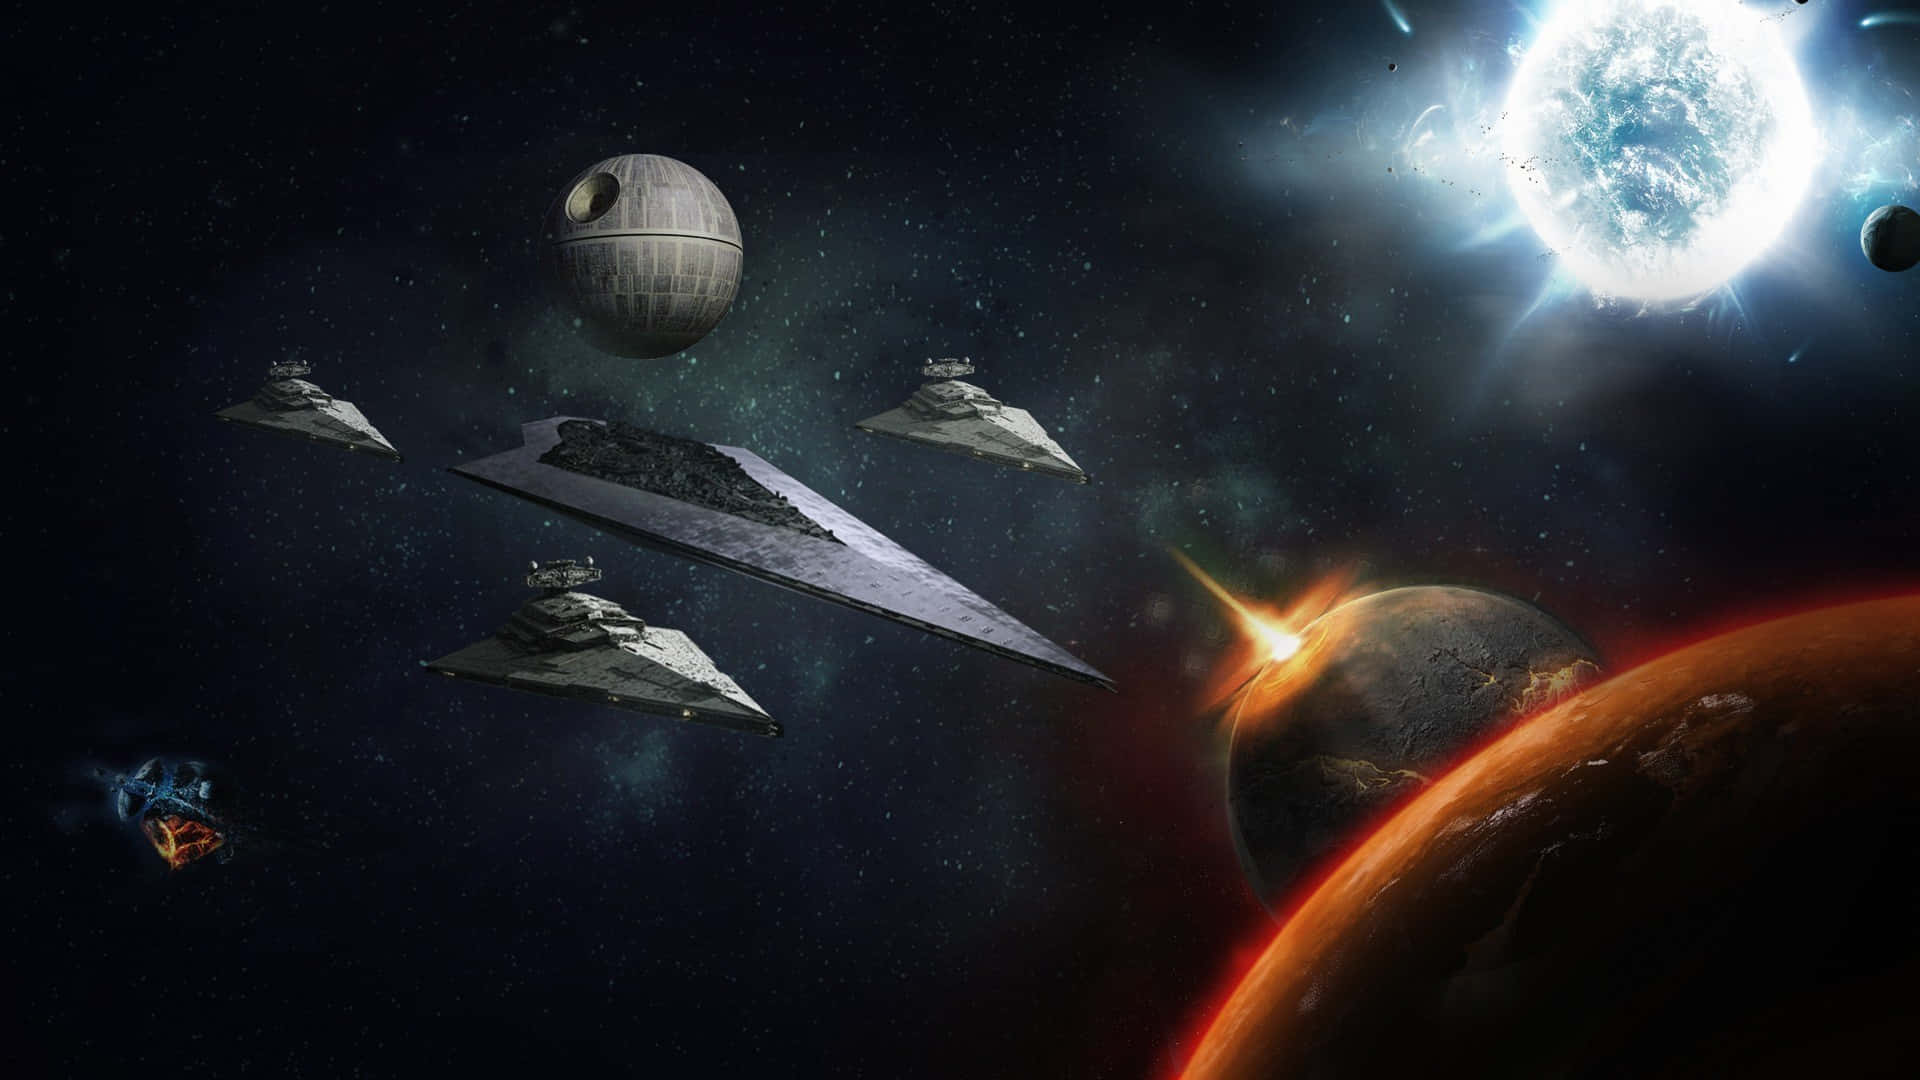 Experience the magical world of Star Wars in Space